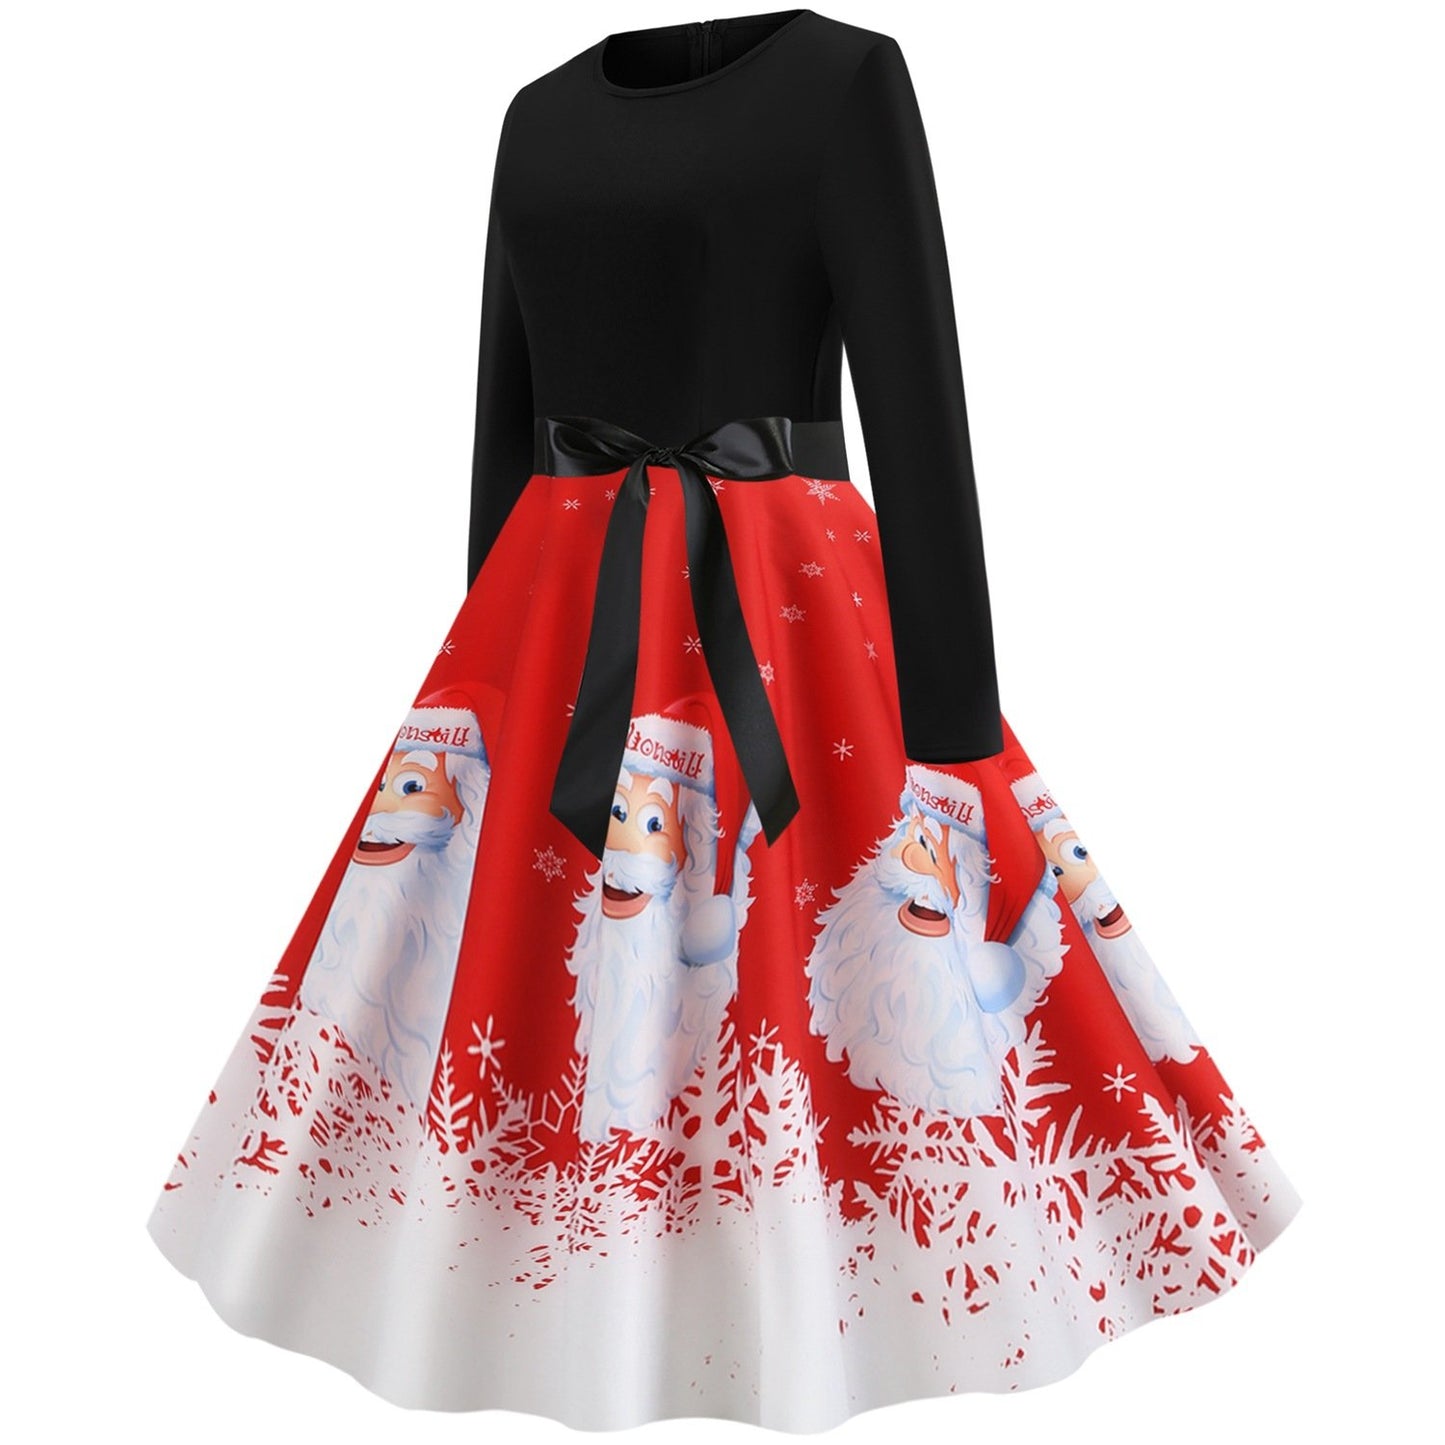 Vintage Merry Christmas Round Neck Long Sleeves Dresses-STYLEGOING